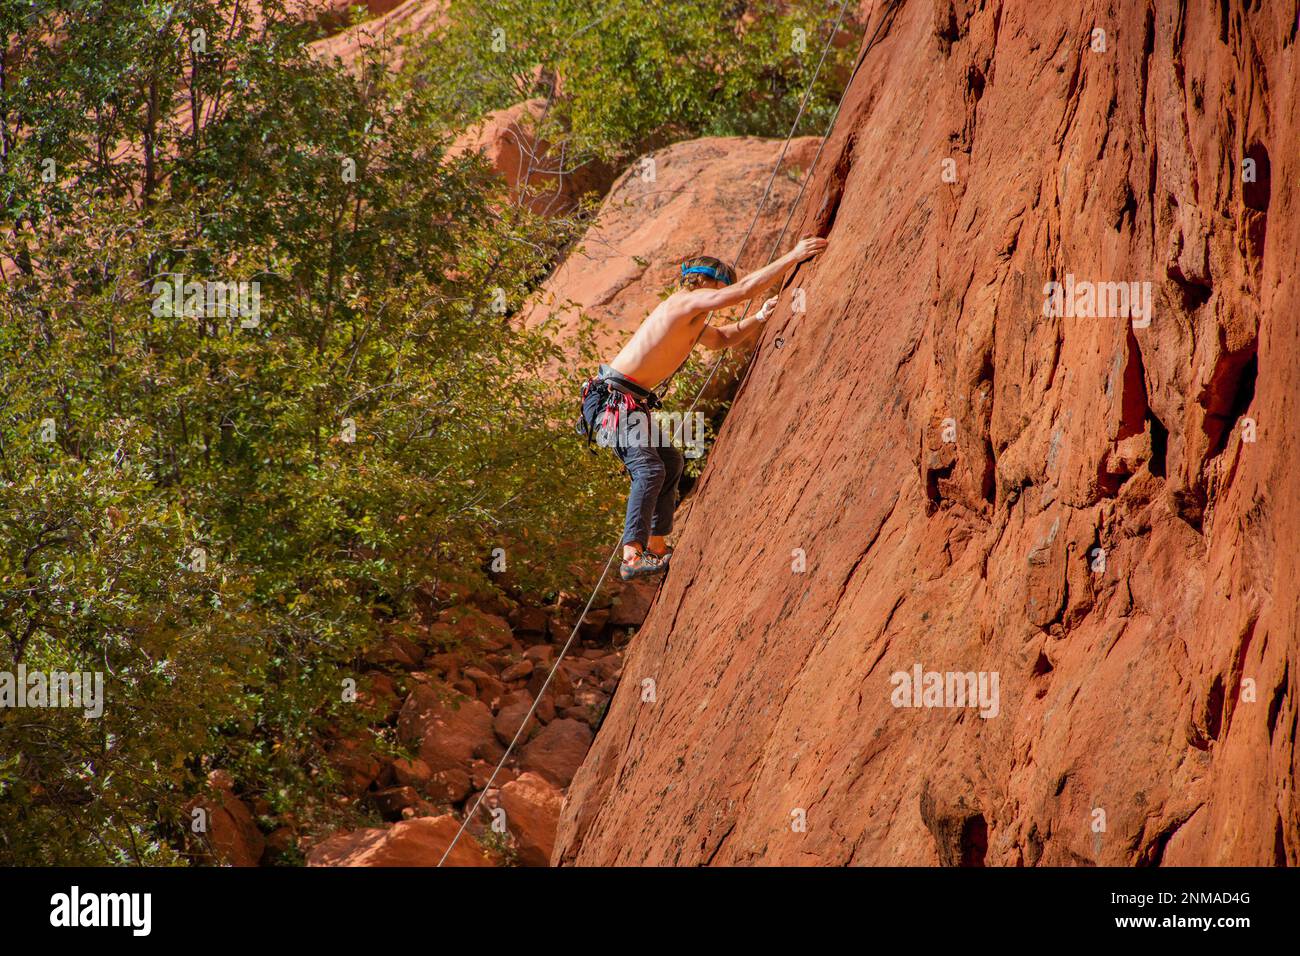 Young man climbing red eroded cliff in Garden of the Gods Colorado USA Stock Photo